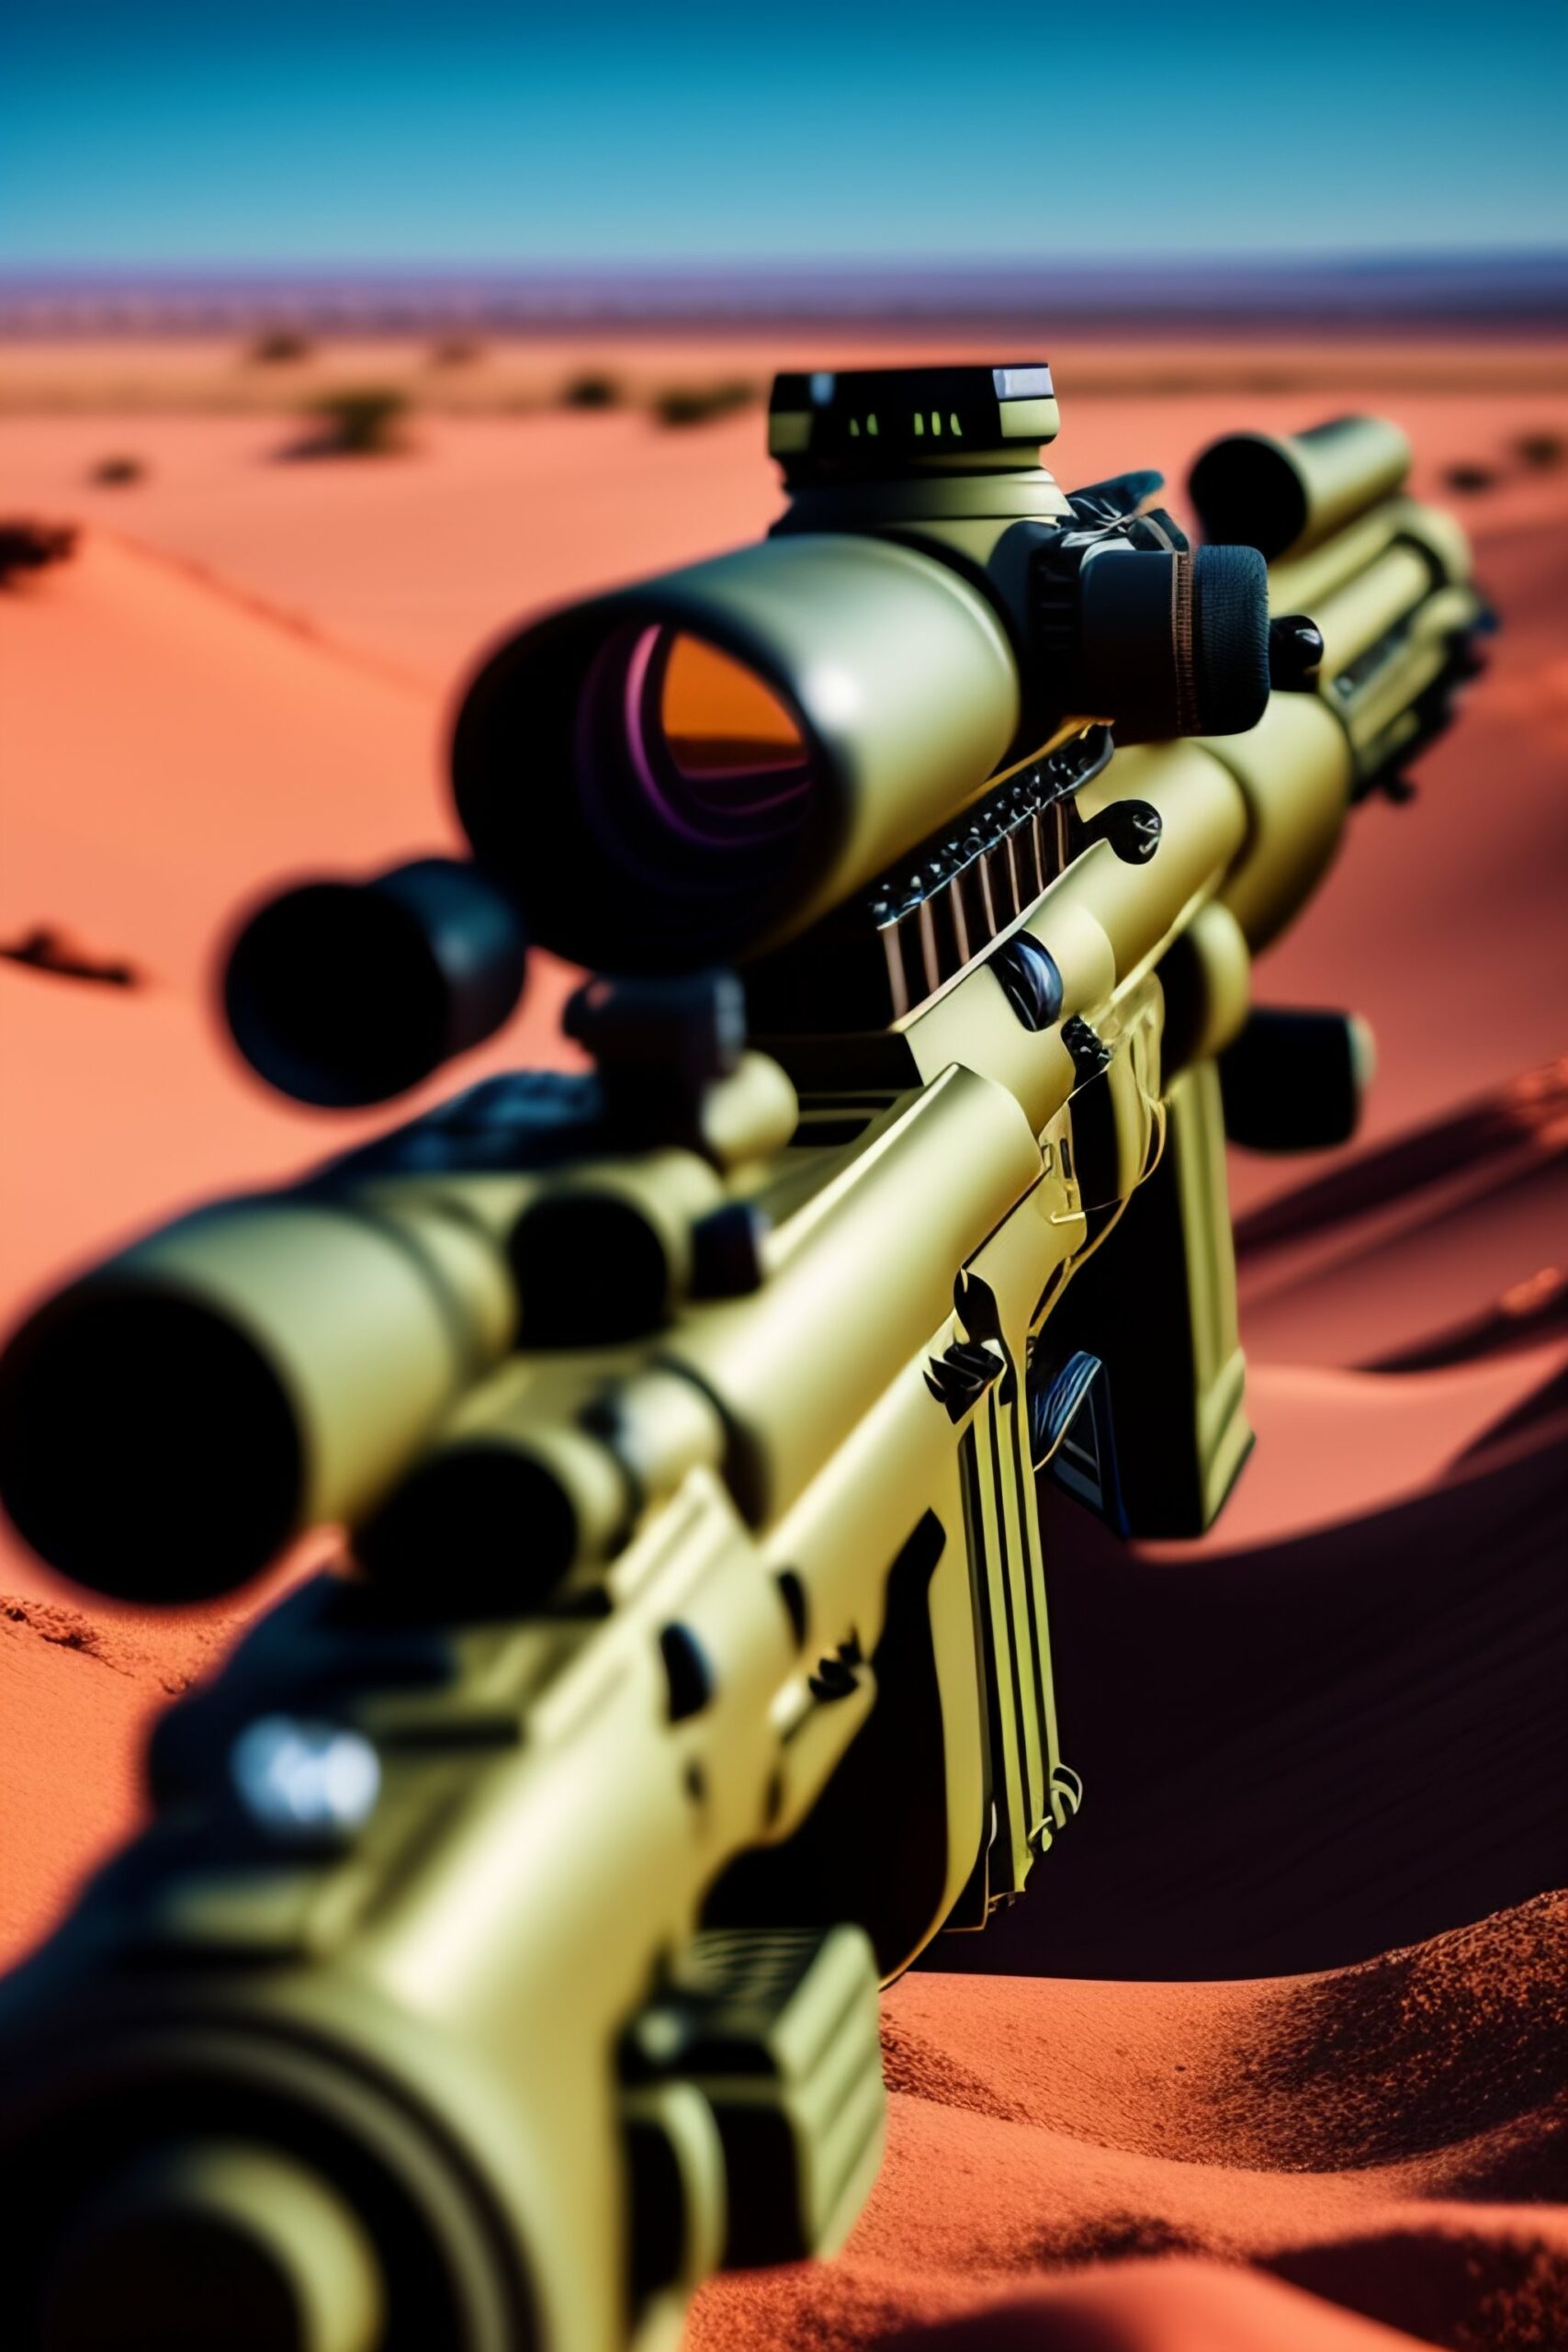 Caliber Hub The Best Sniper Rifles for Hunting and Target Shooting